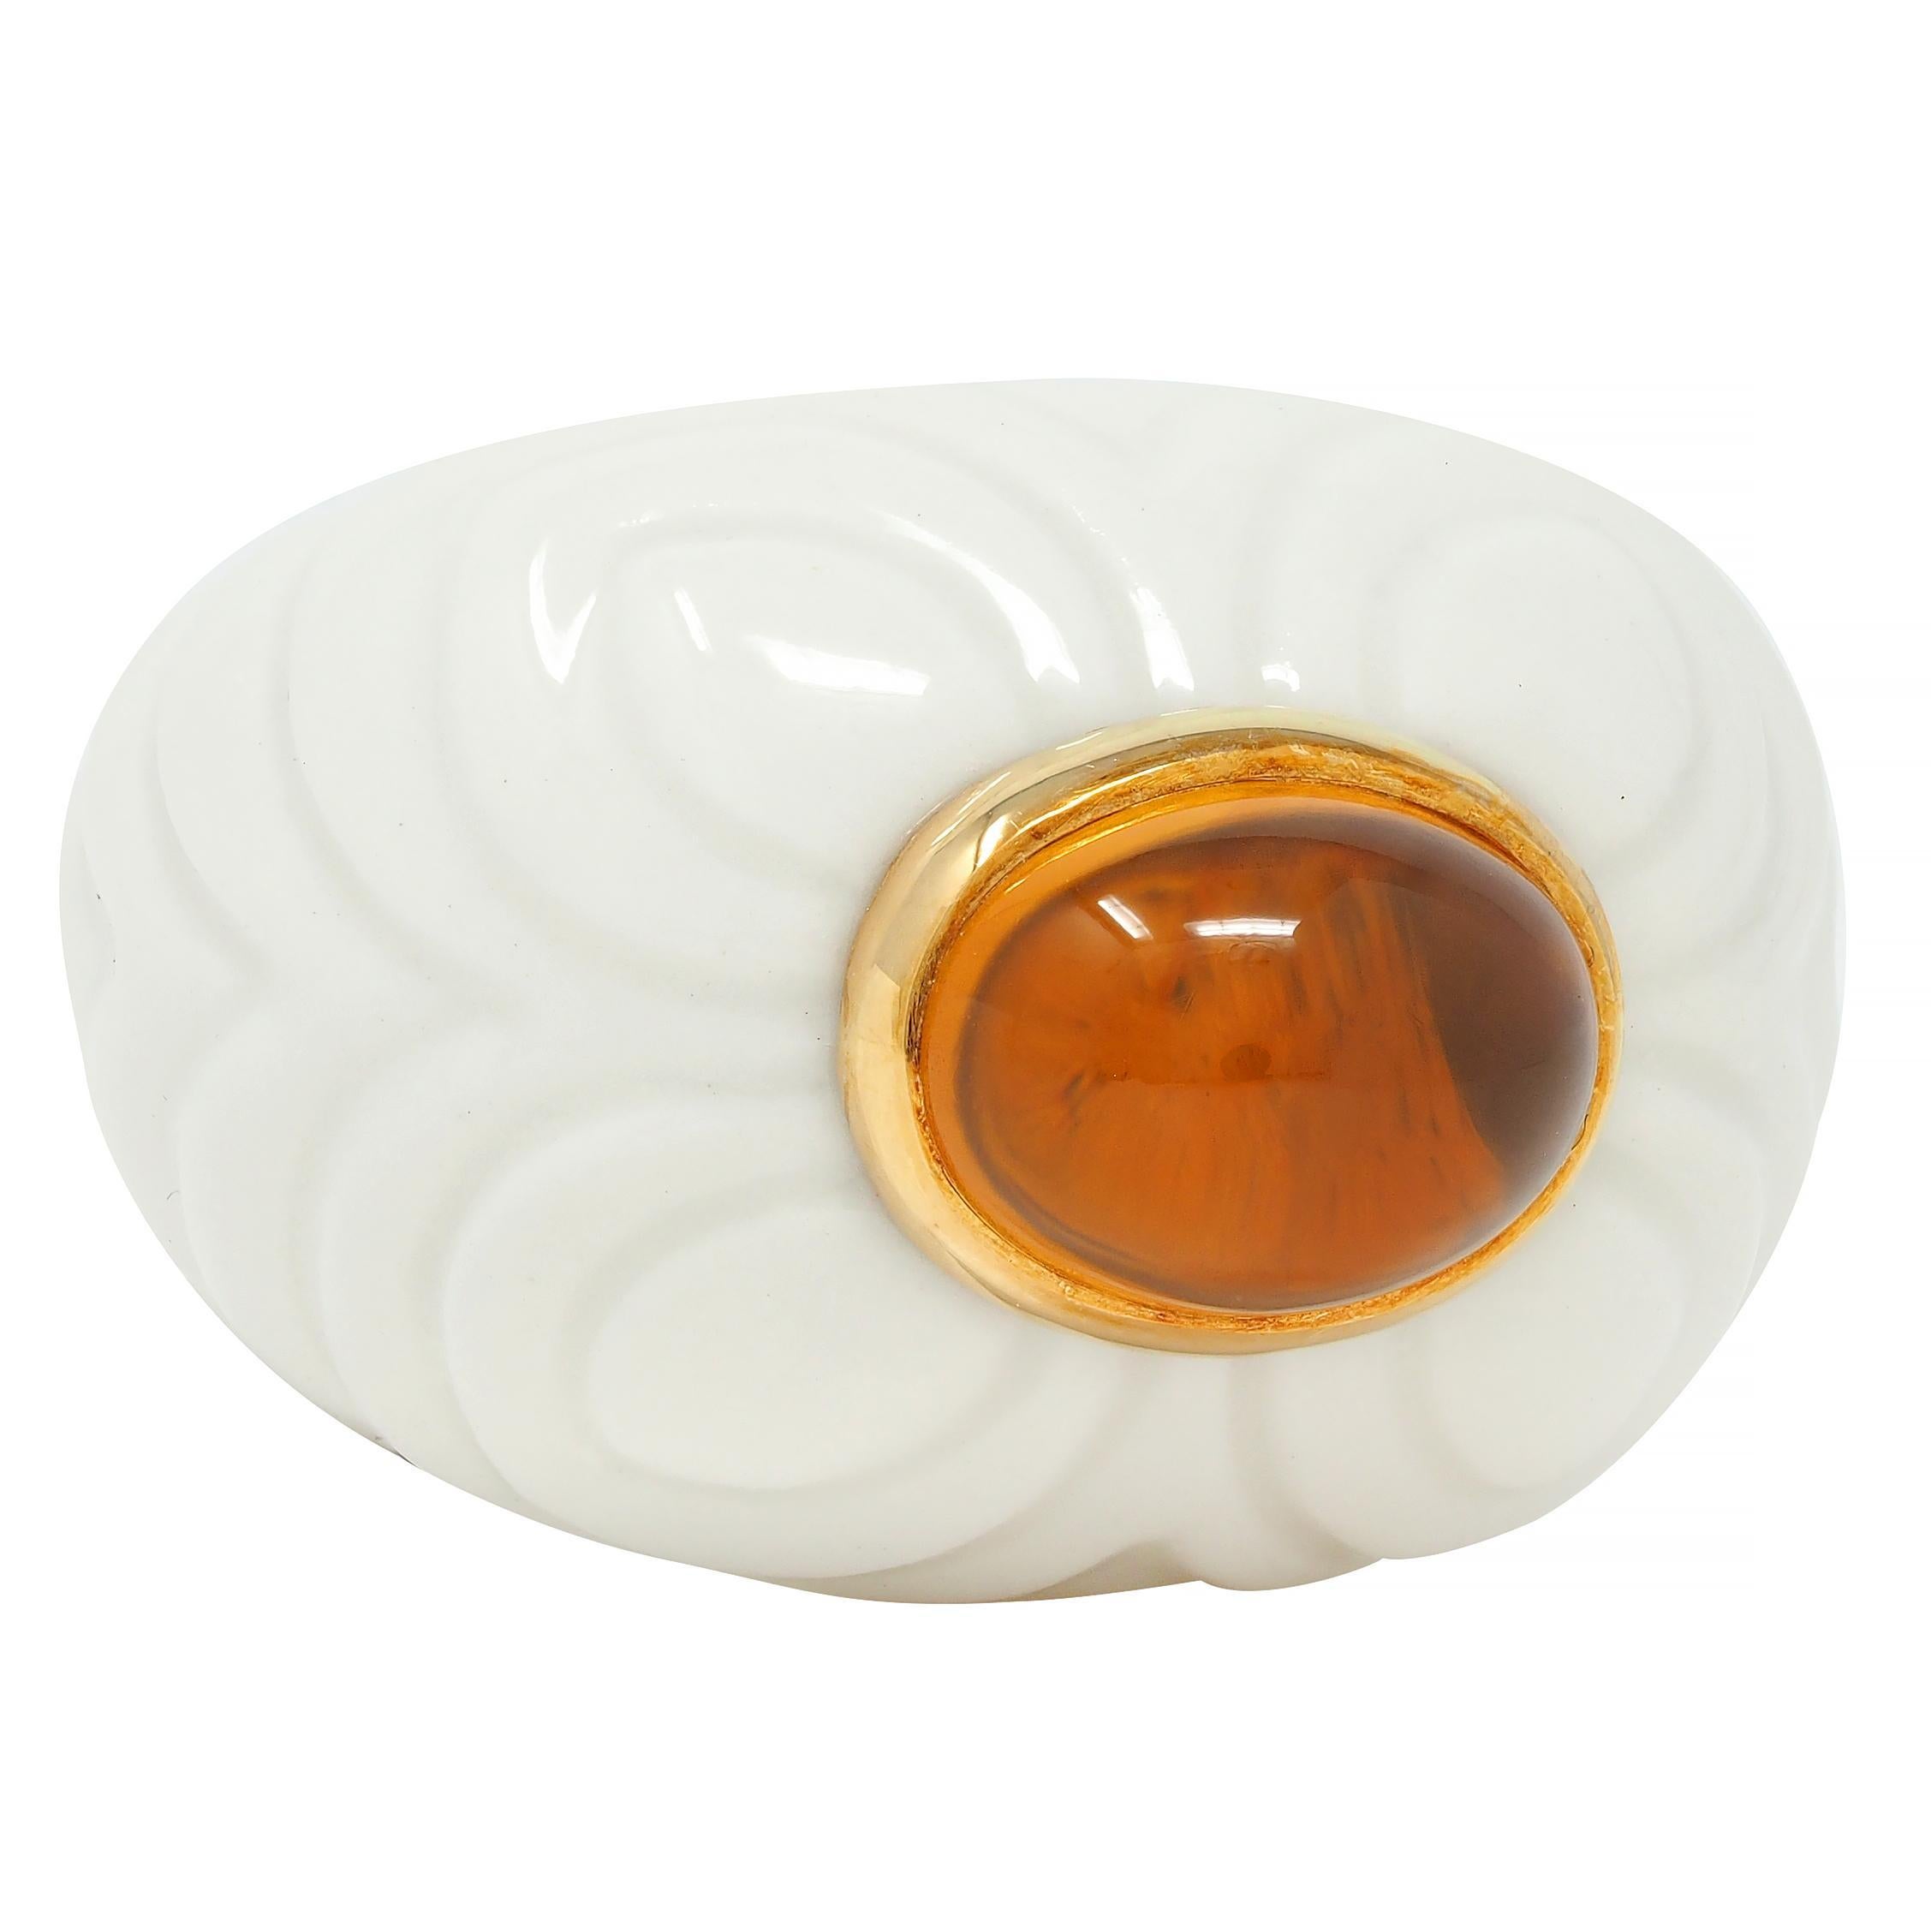 Centering an oval-shaped citrine cabochon measuring 7.5 x 10.5 mm
Transparent medium brownish orange - set east to west in gold bezel
Set atop a domed bombé shaped porcelain ceramic form 
Grooved with a tiered quatrefoil petal motif
Opaque glossy